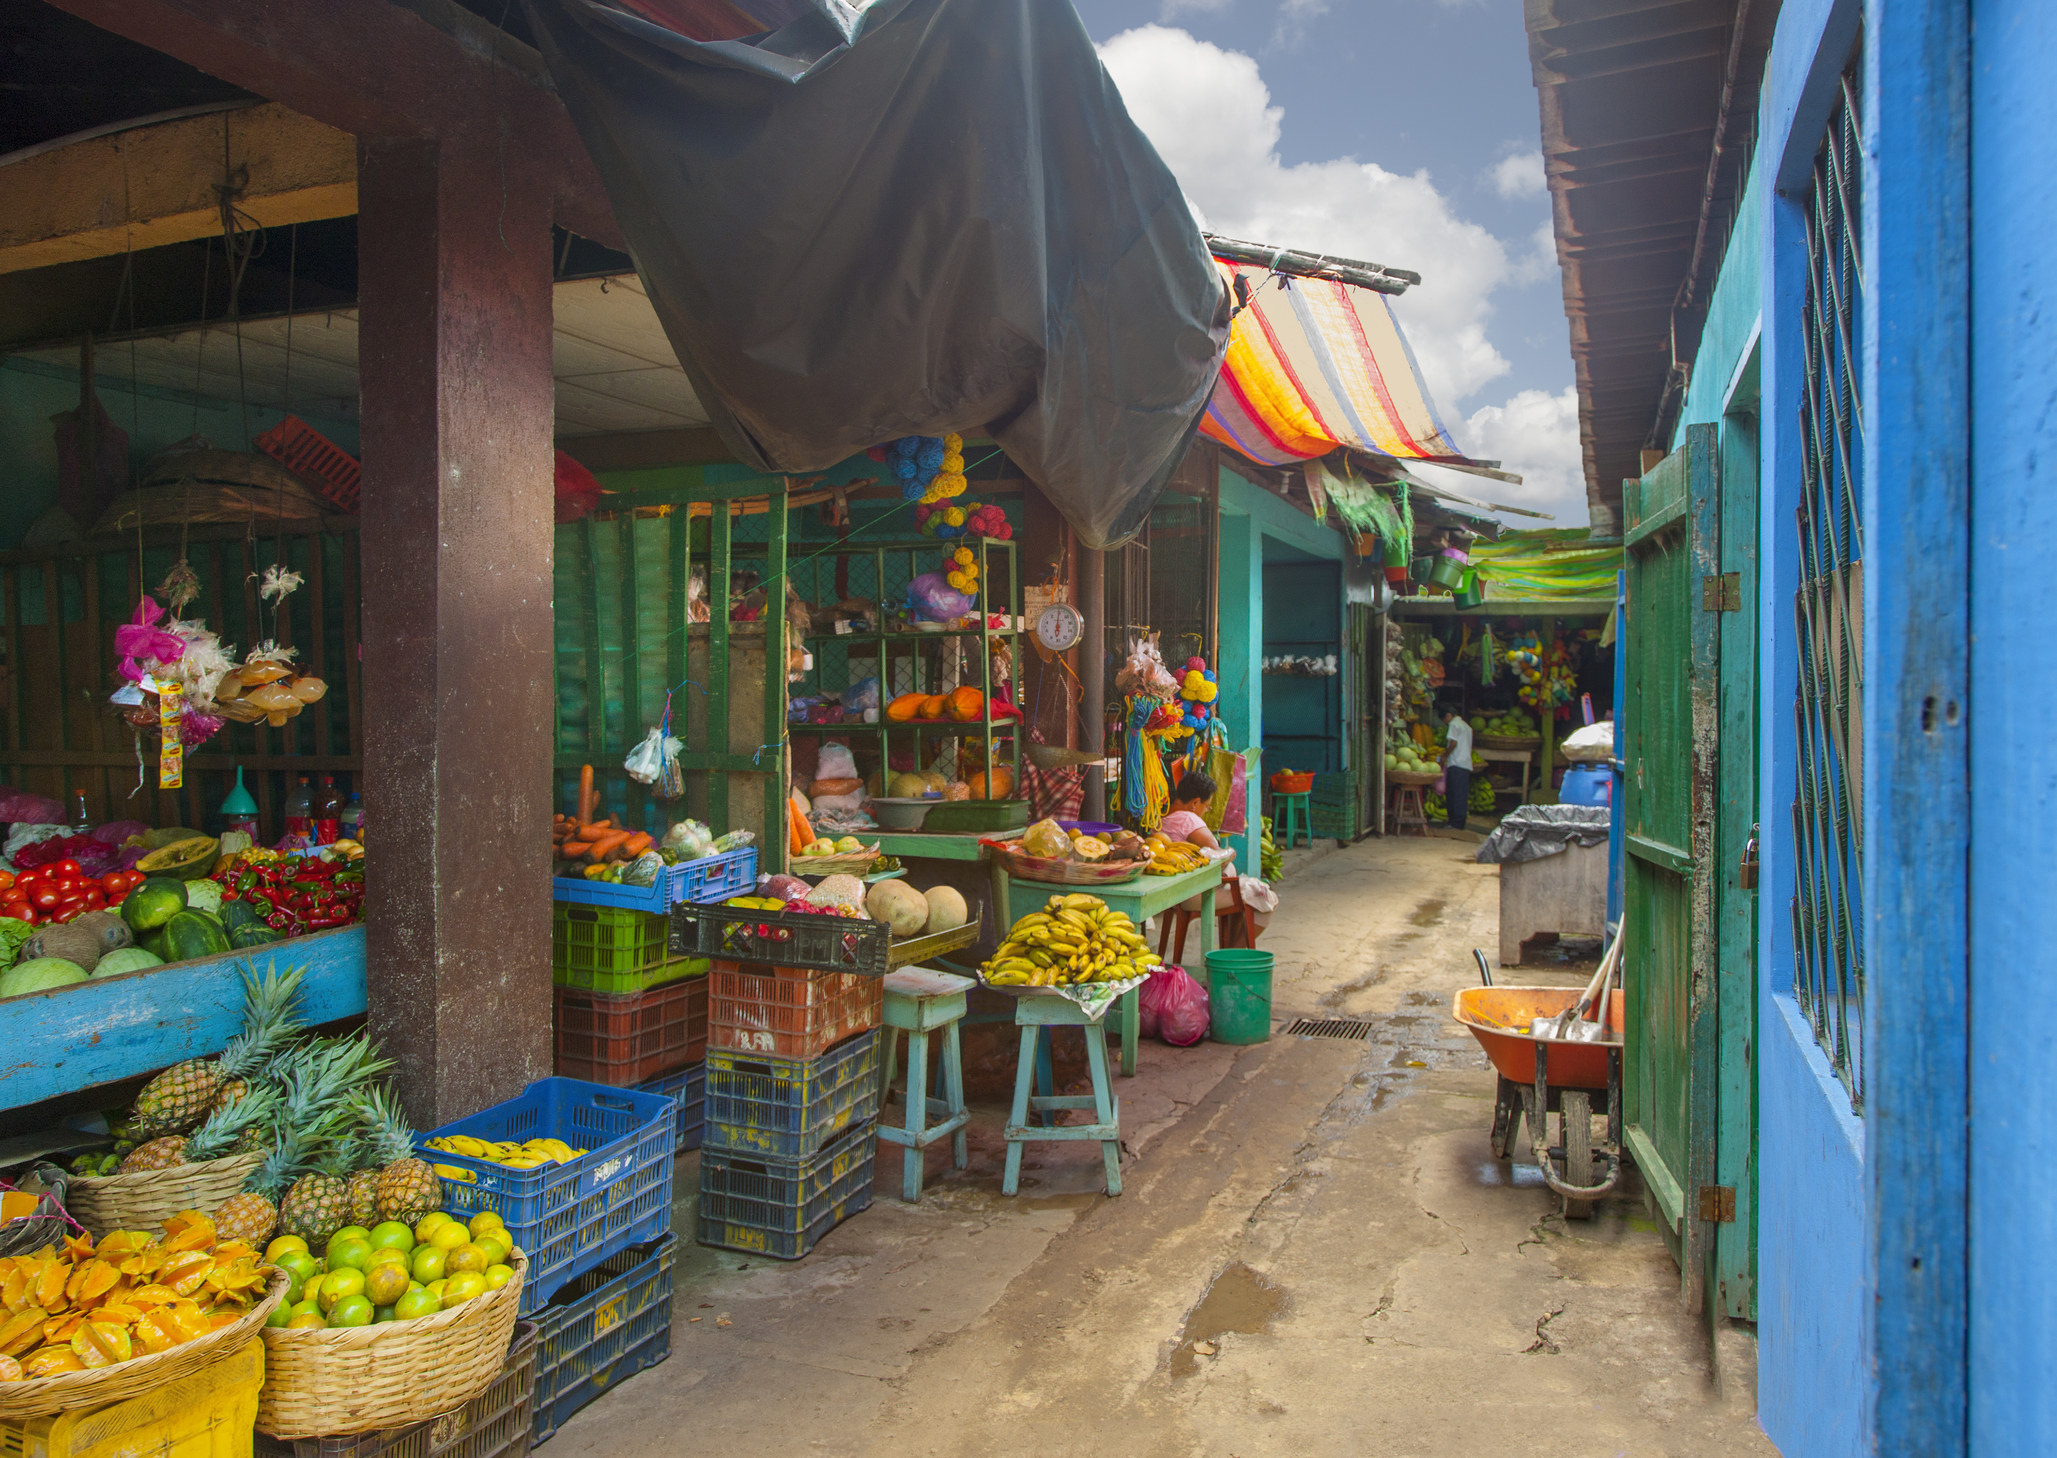 A colorful market selling fruit.